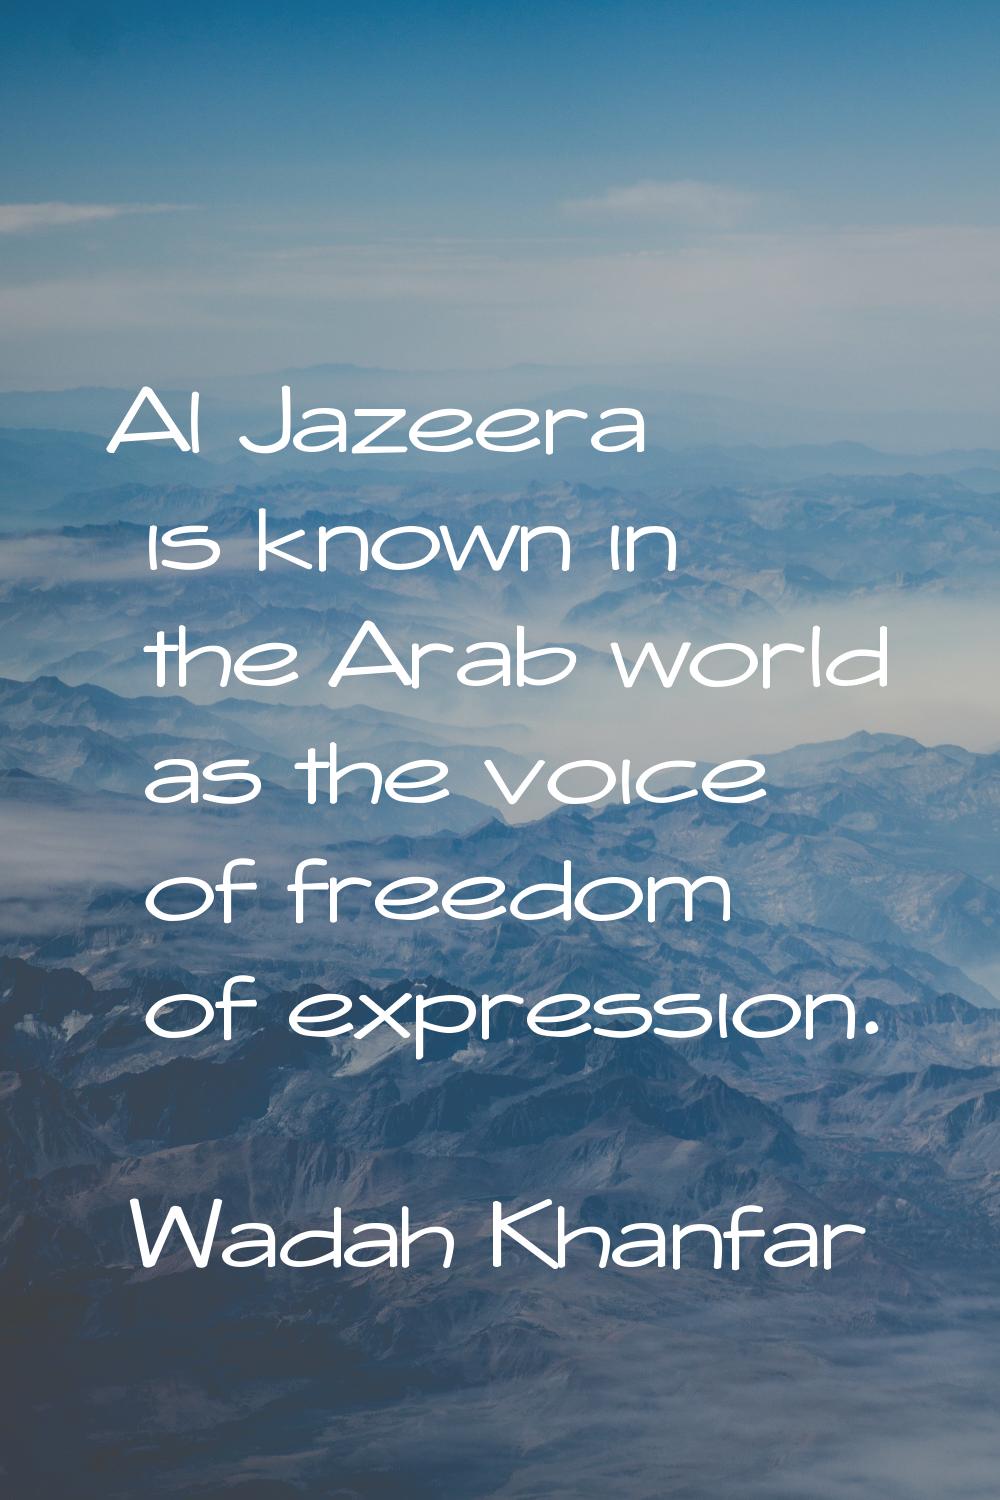 Al Jazeera is known in the Arab world as the voice of freedom of expression.